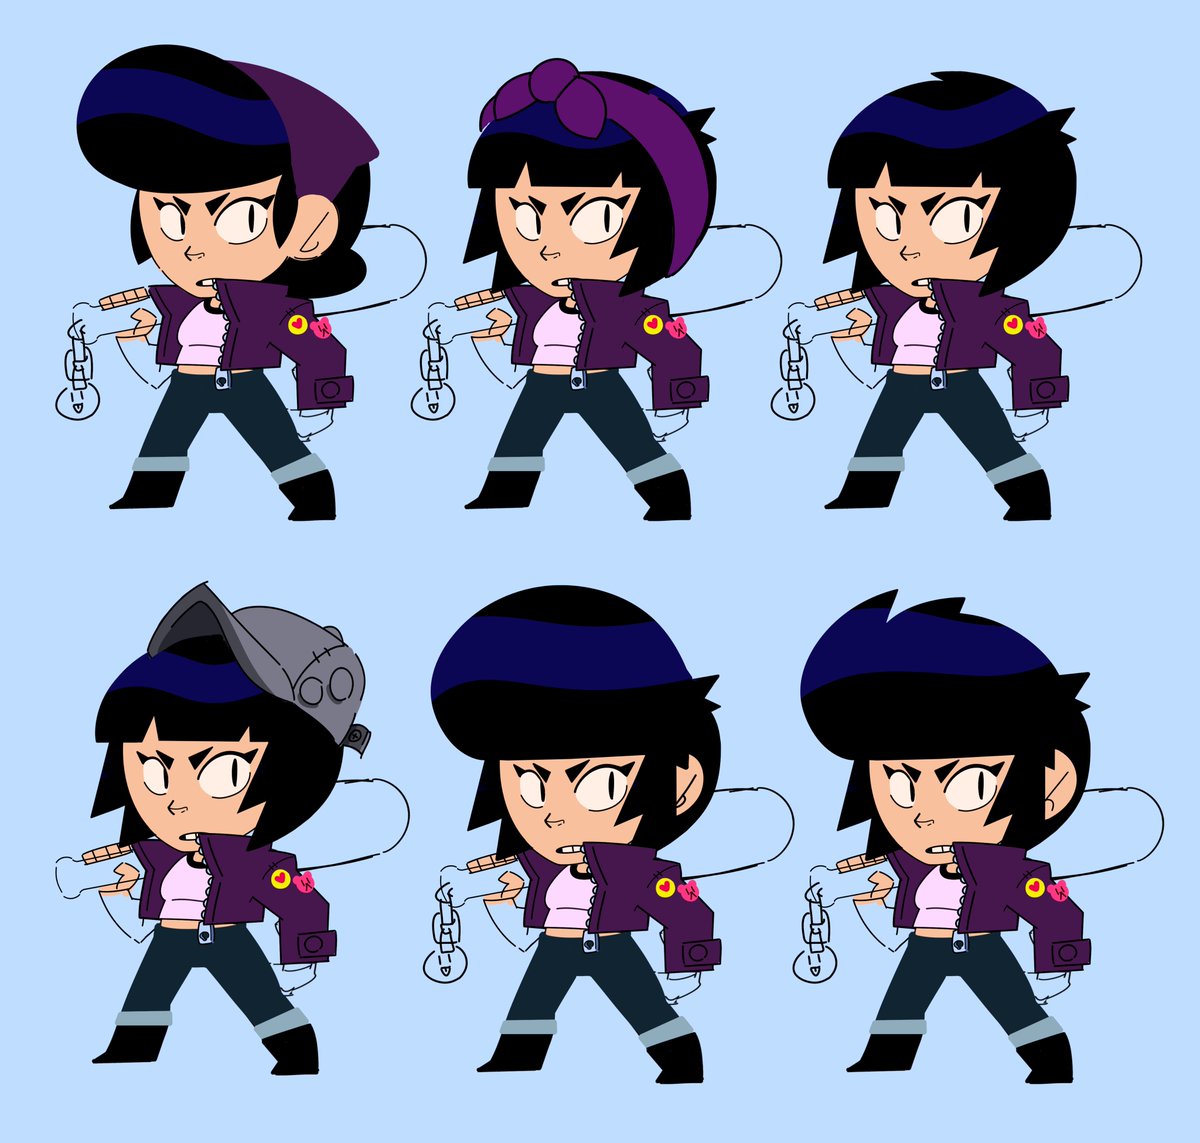 Paul On Twitter Here Are Some Iterations Of The Design Of Bibi And Mr Bat Brawlstars Characterdesign Characterart Conceptart Concept Https T Co Vbpxpcr4oz